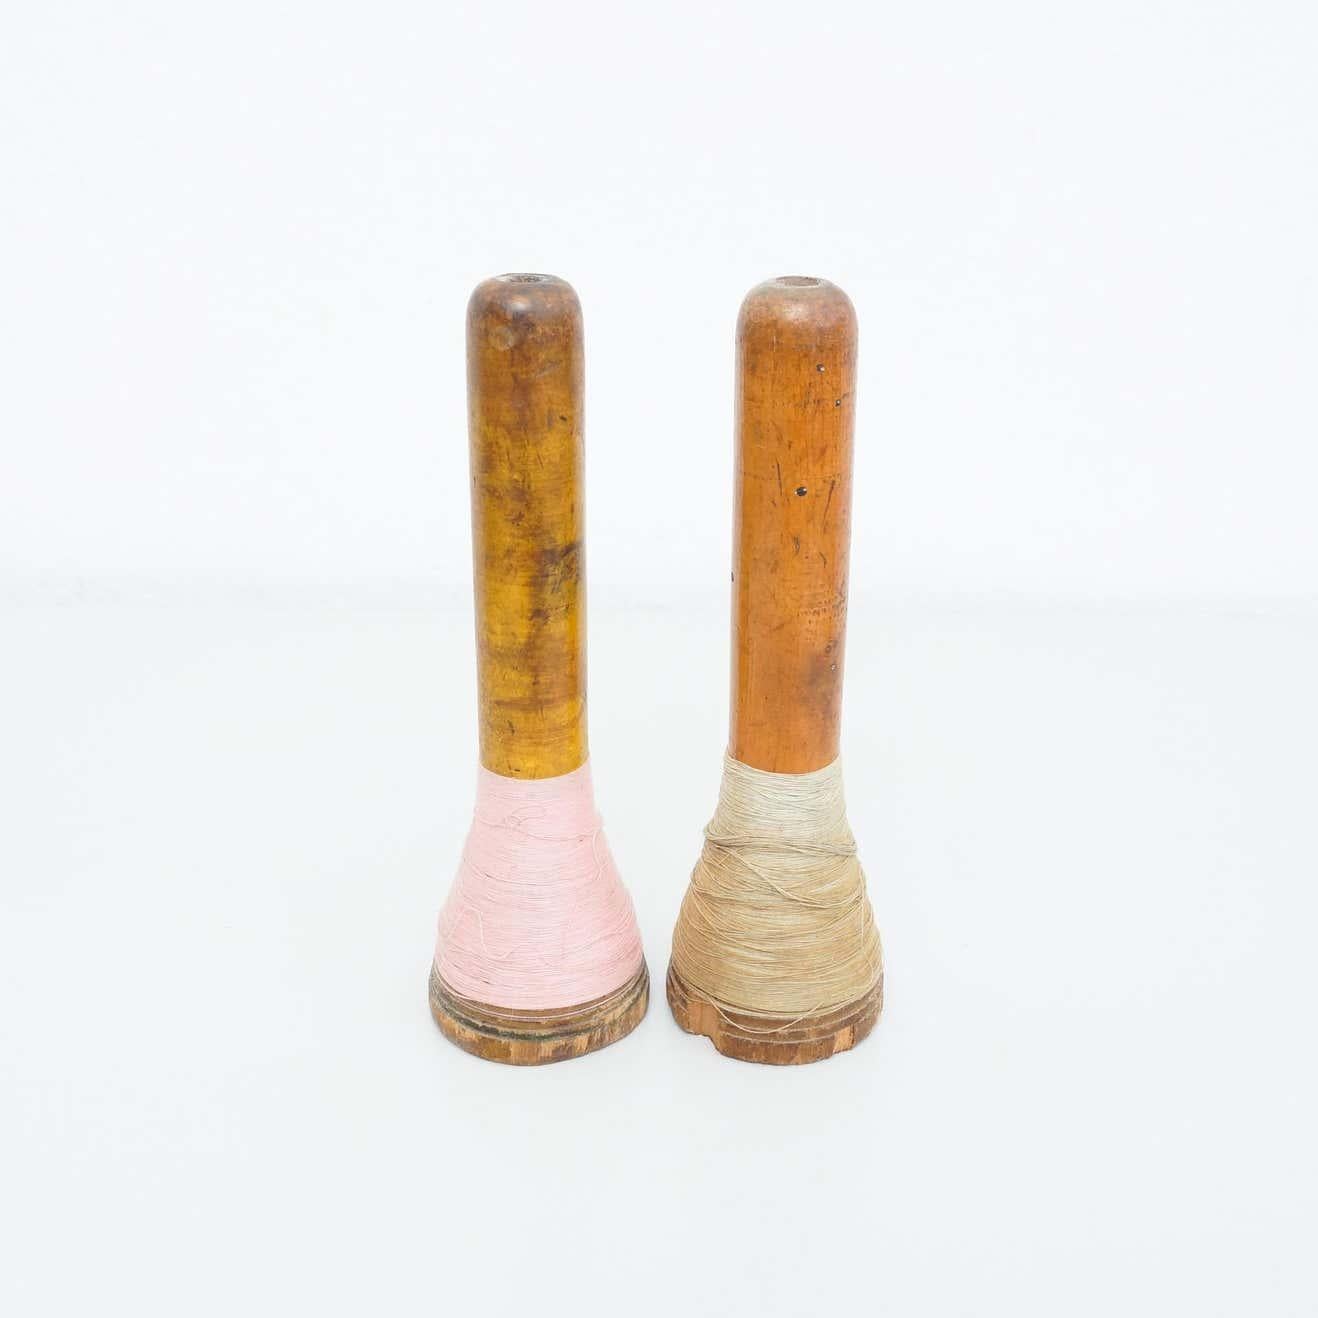 Rustic wooden spools of thread, by unknown manufacturer from Spain, circa 1930.

In original condition, with minor wear consistent with age and use, preserving a beautiful patina.

Materials:
Wood

Dimensions:
Ø 7.5 cm x H 26 cm.